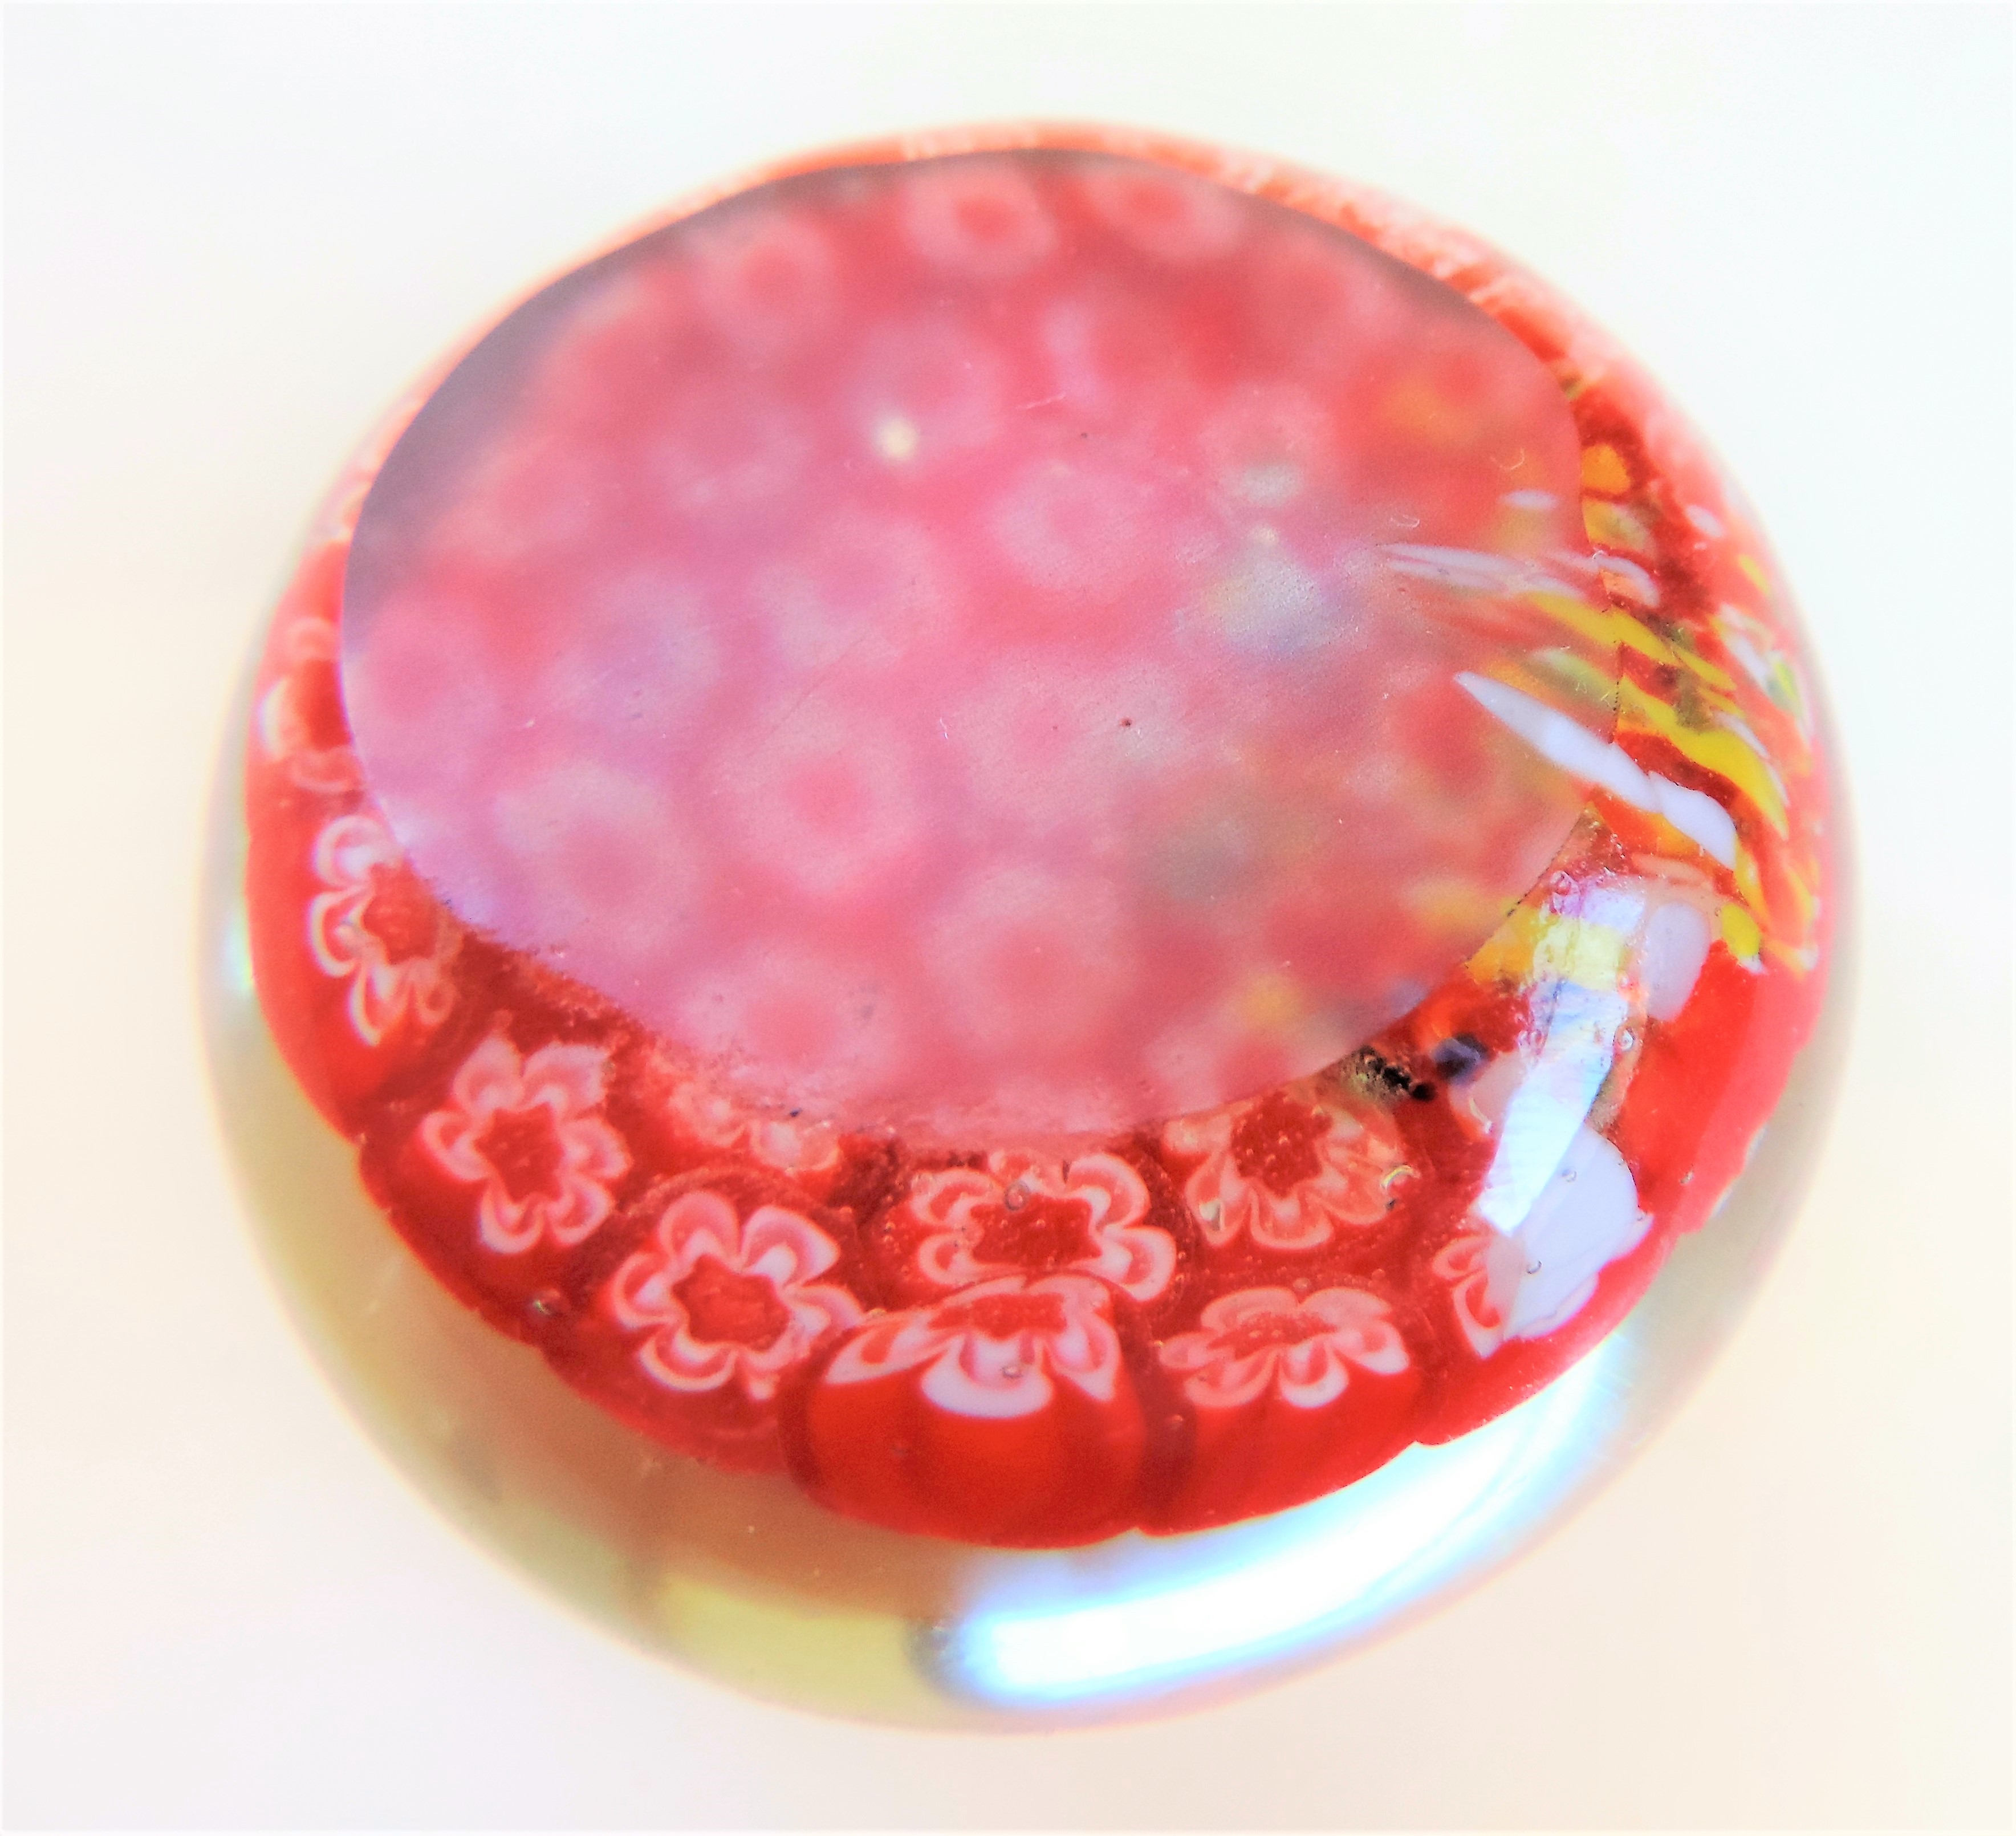 Vintage Murano Cane Millefiore Paperweight c.1960's - Image 3 of 3